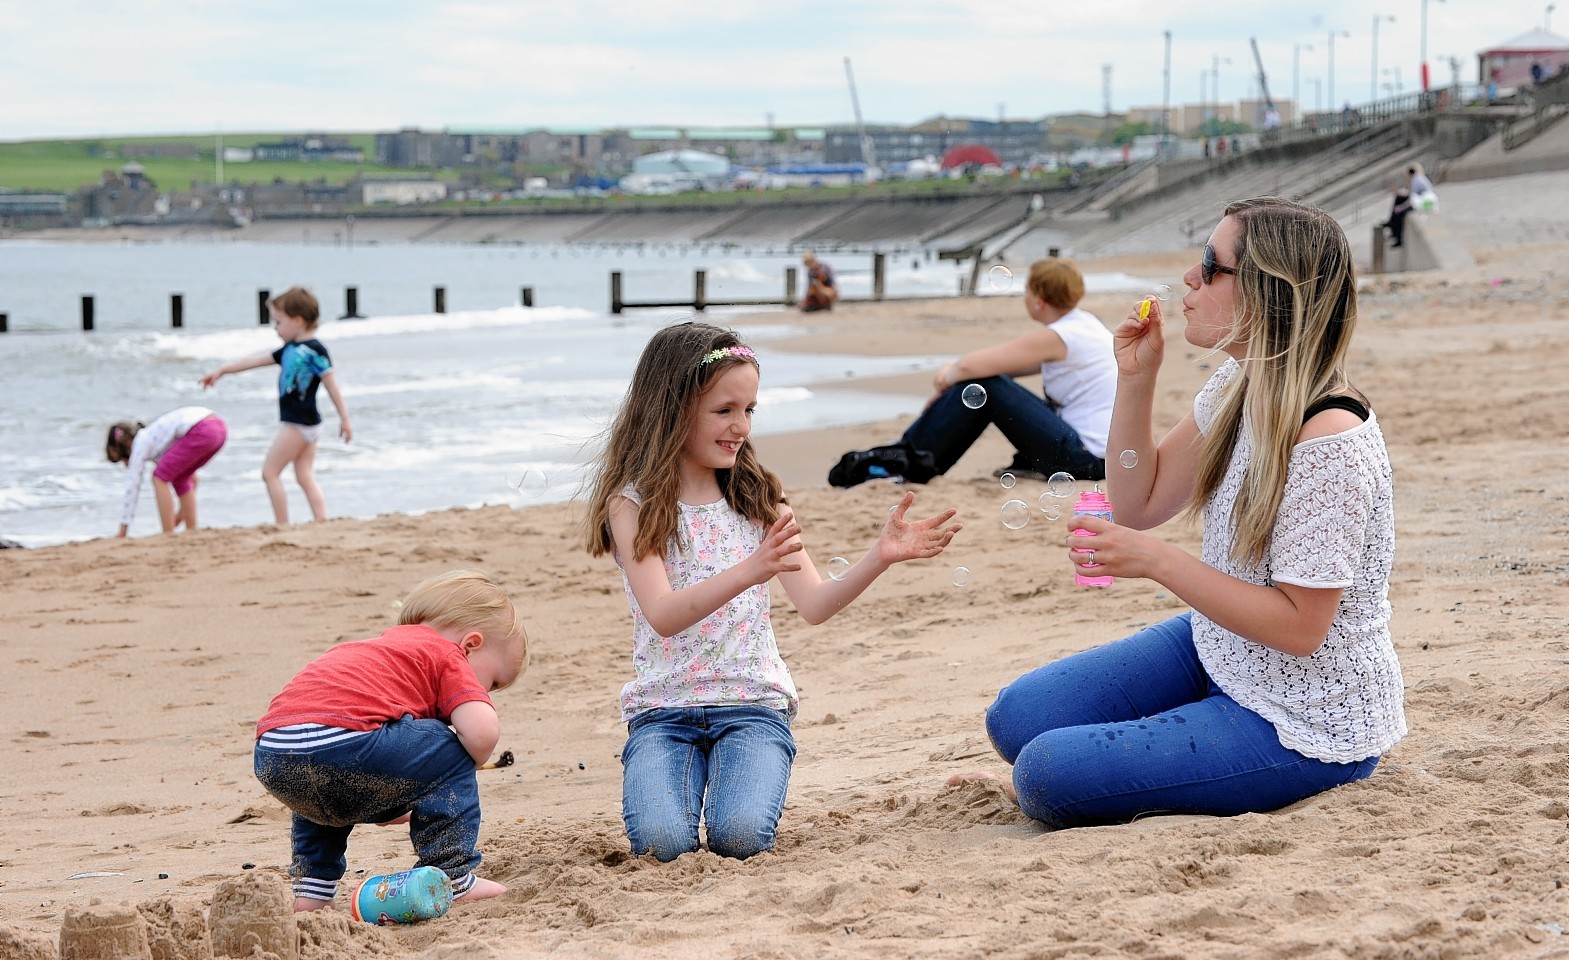 It is expected to be overcast in the north east for the next few days, although a warm summer has been predicted